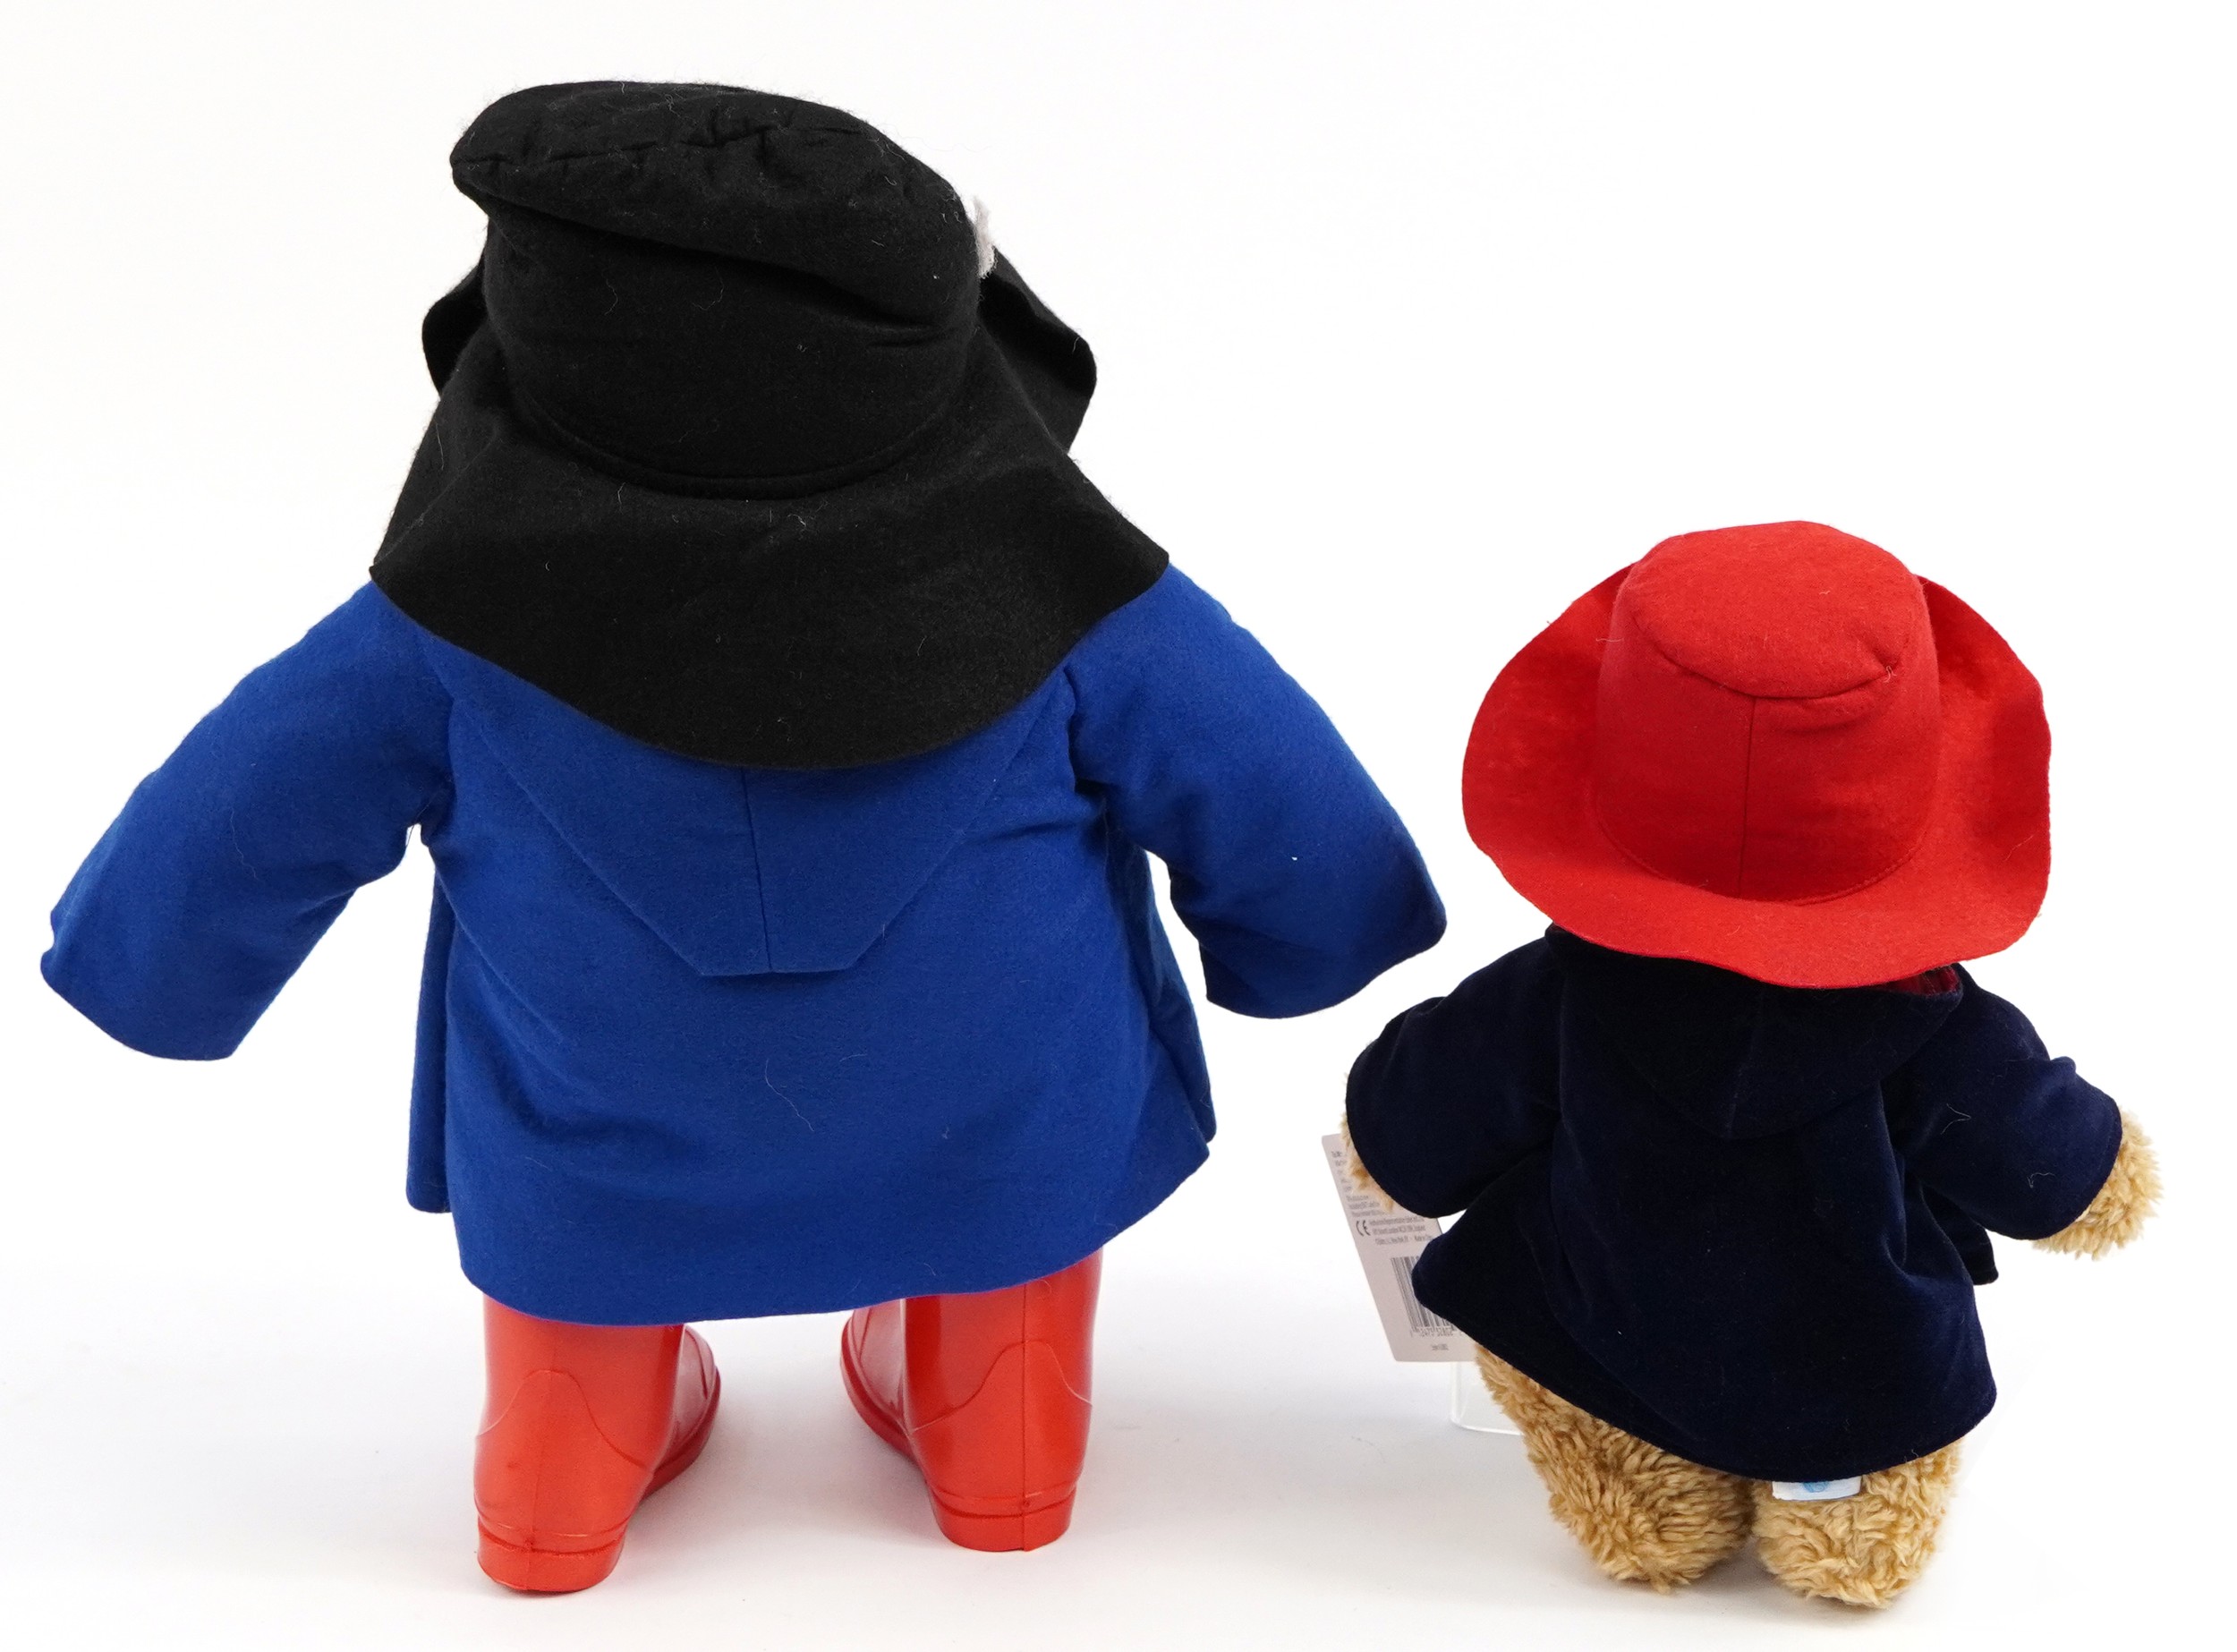 Vintage Paddington Bear with red boots and a 40th anniversary Paddington Bear, the largest 46cm high - Image 2 of 4